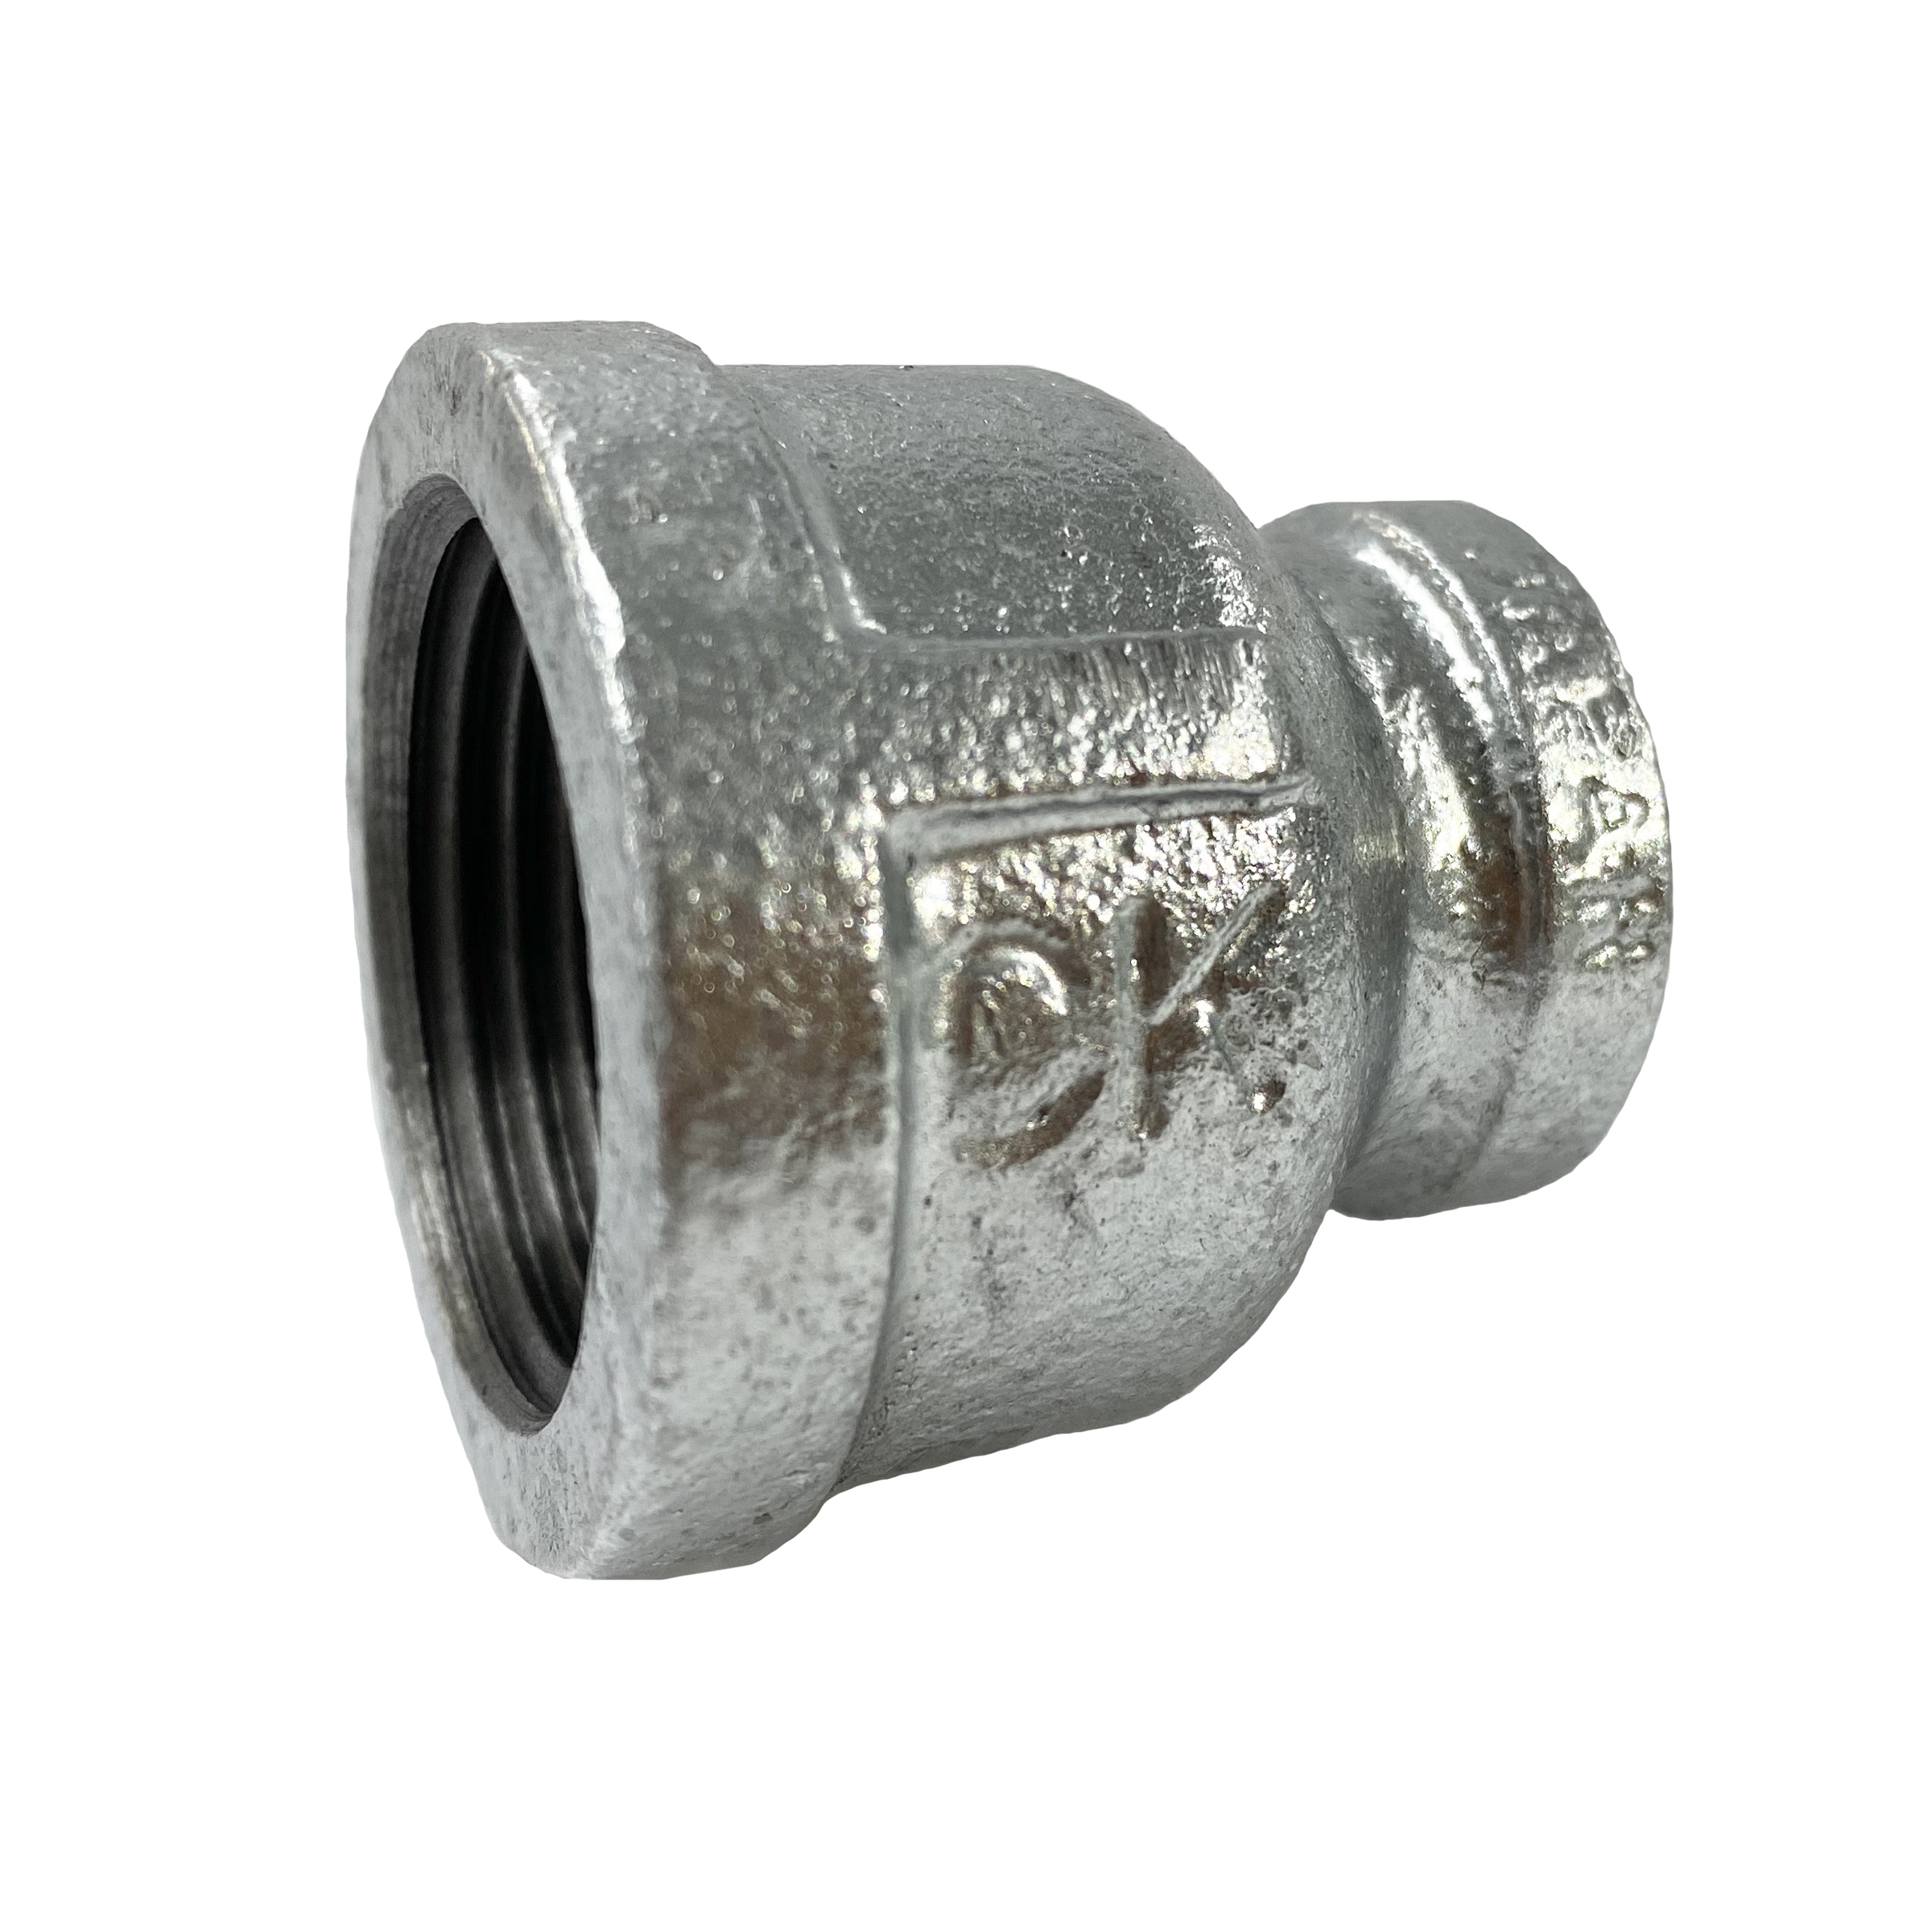 CK Fittings - Screw-in Type Malleable Cast Iron Pipe Fitting - Socket with Different Diameters with Band BRS-32X25-W